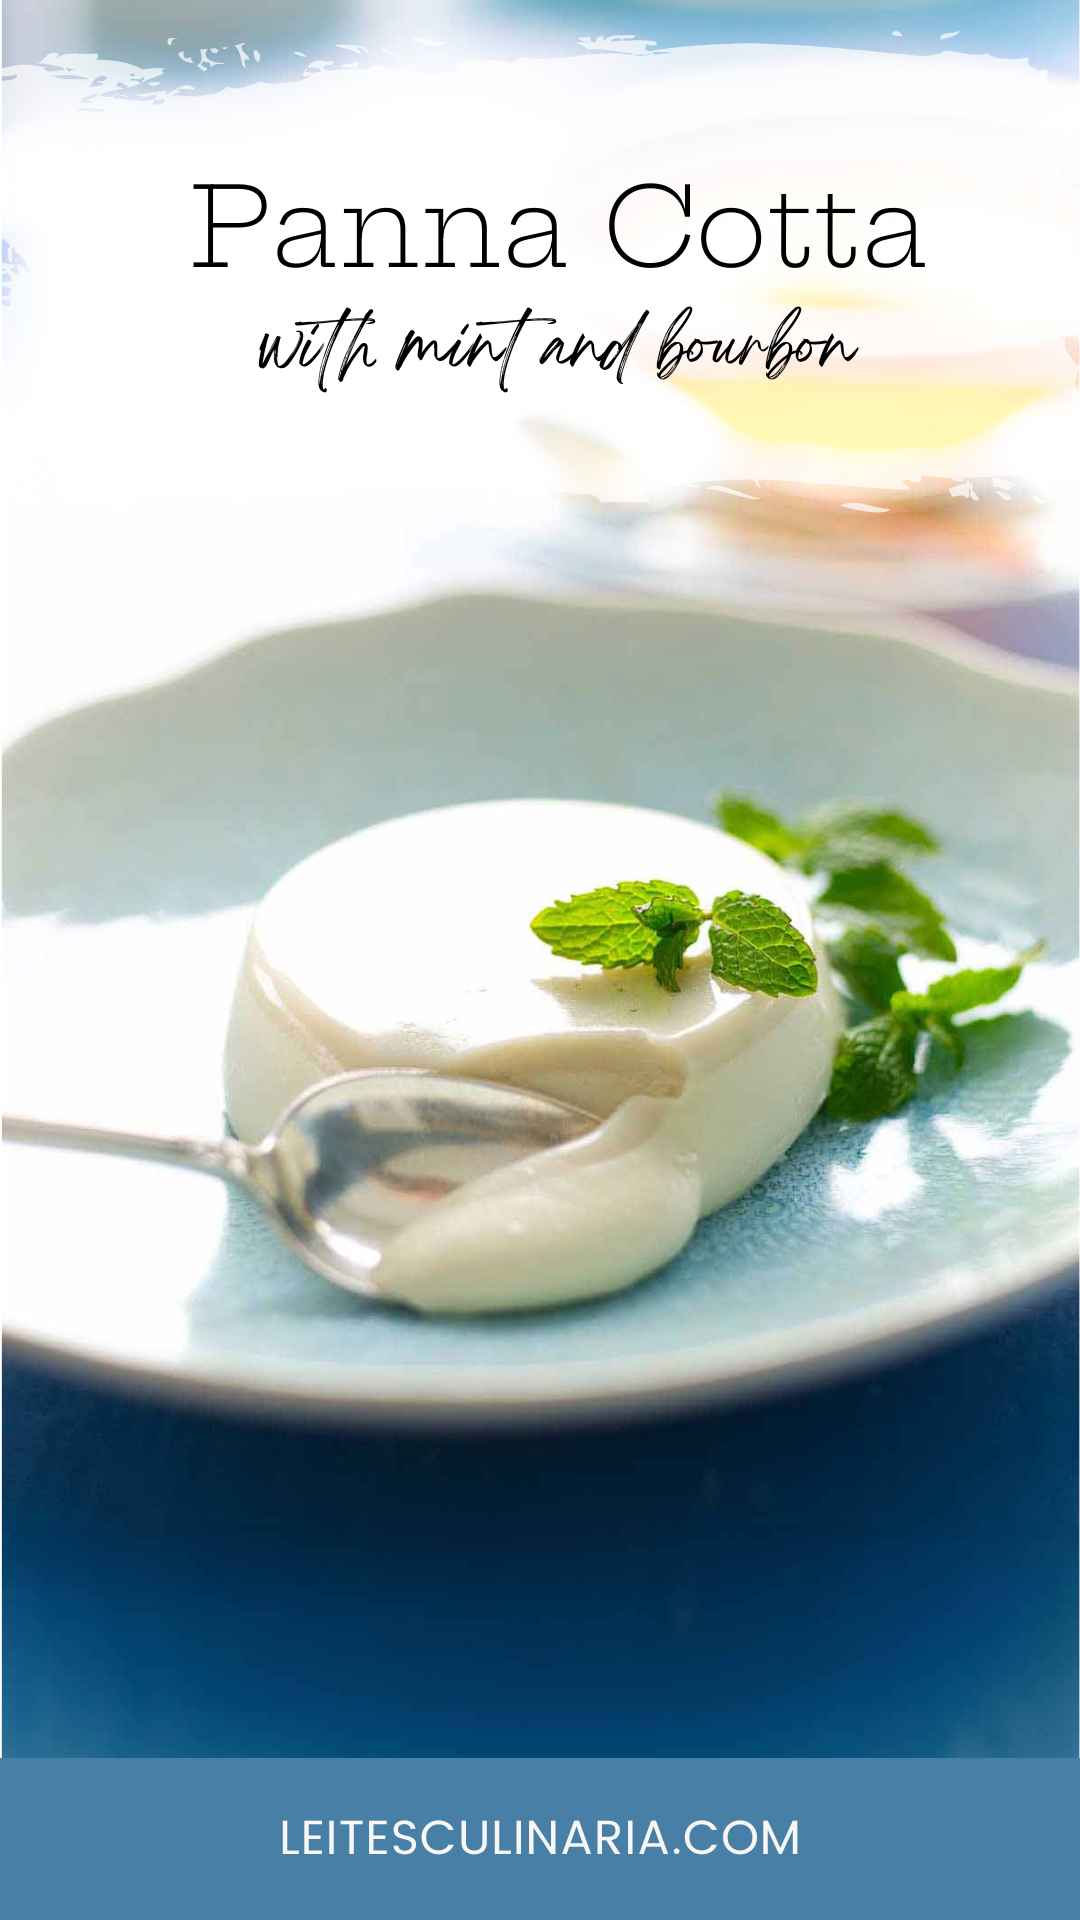 A serving of mint julep panna cotta in a blue bowl, garnished with mint leaves.